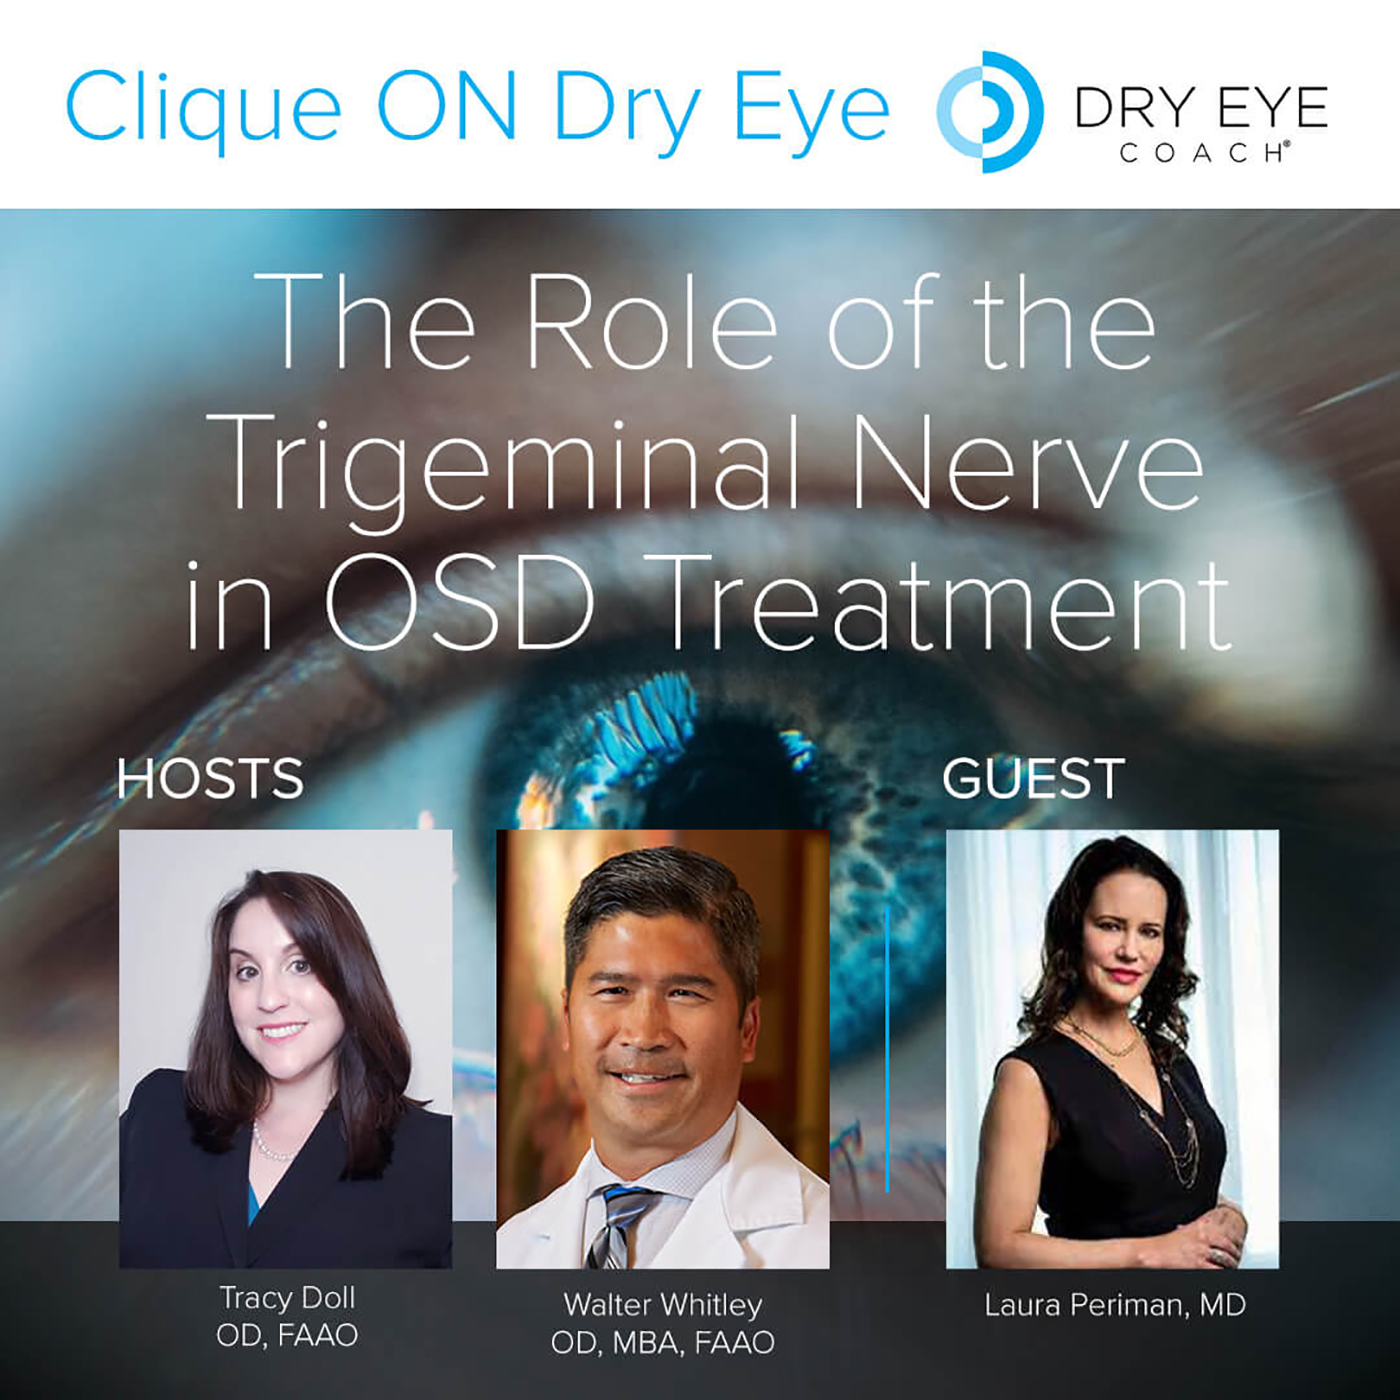 The Role of Trigeminal Nerve in OSD Treatment